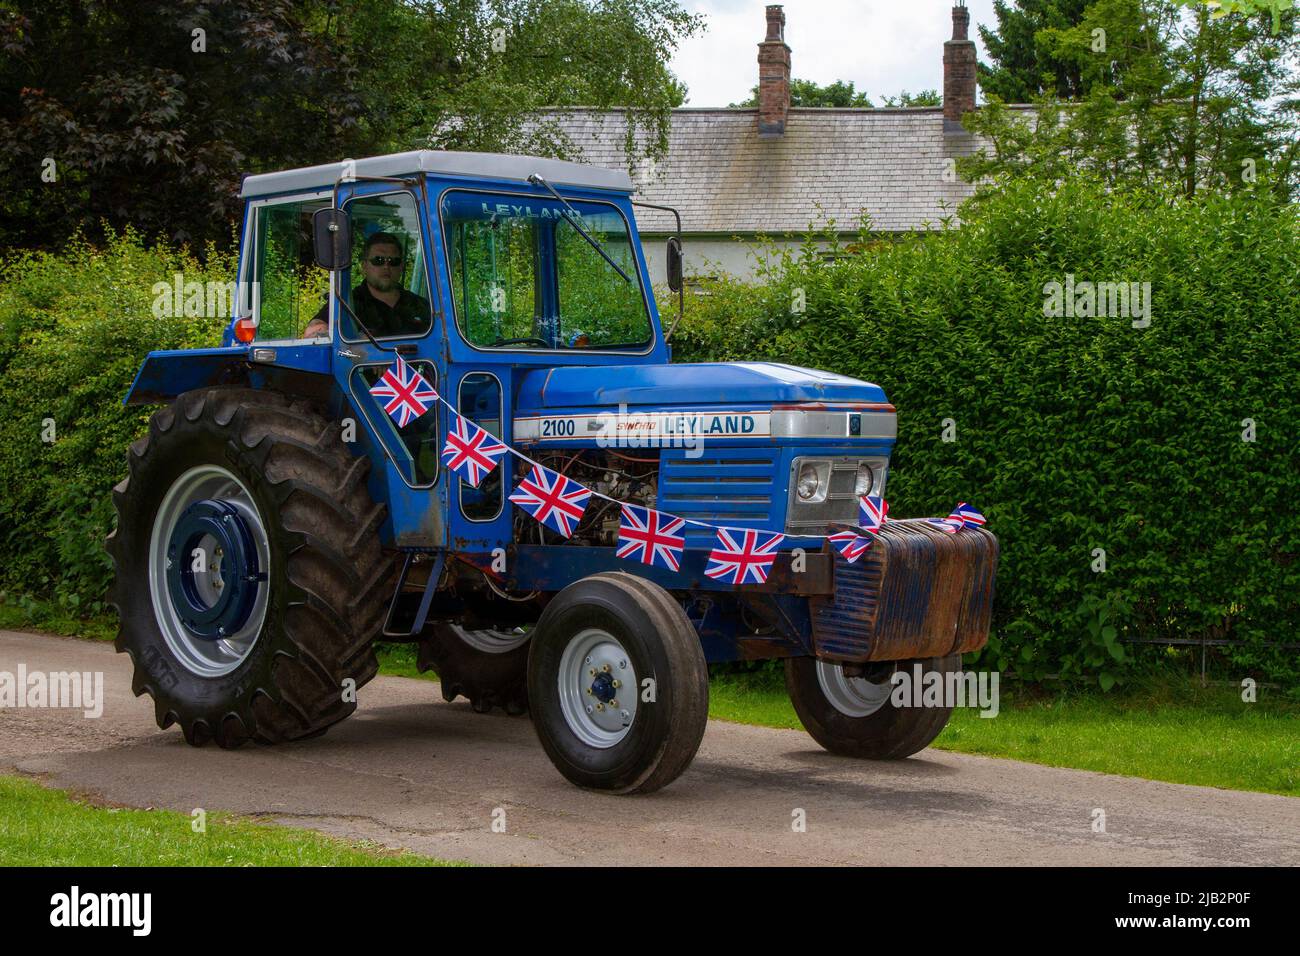 Classic Tractor Leyland 2100. UK Events, 2 June 2022.  The Queens Jubilee event Festival parade in Worden Park. 3 days of music, fun, enjoyment, and celebration coincide with the  Queen’s Platinum Jubilee weekend. Stock Photo